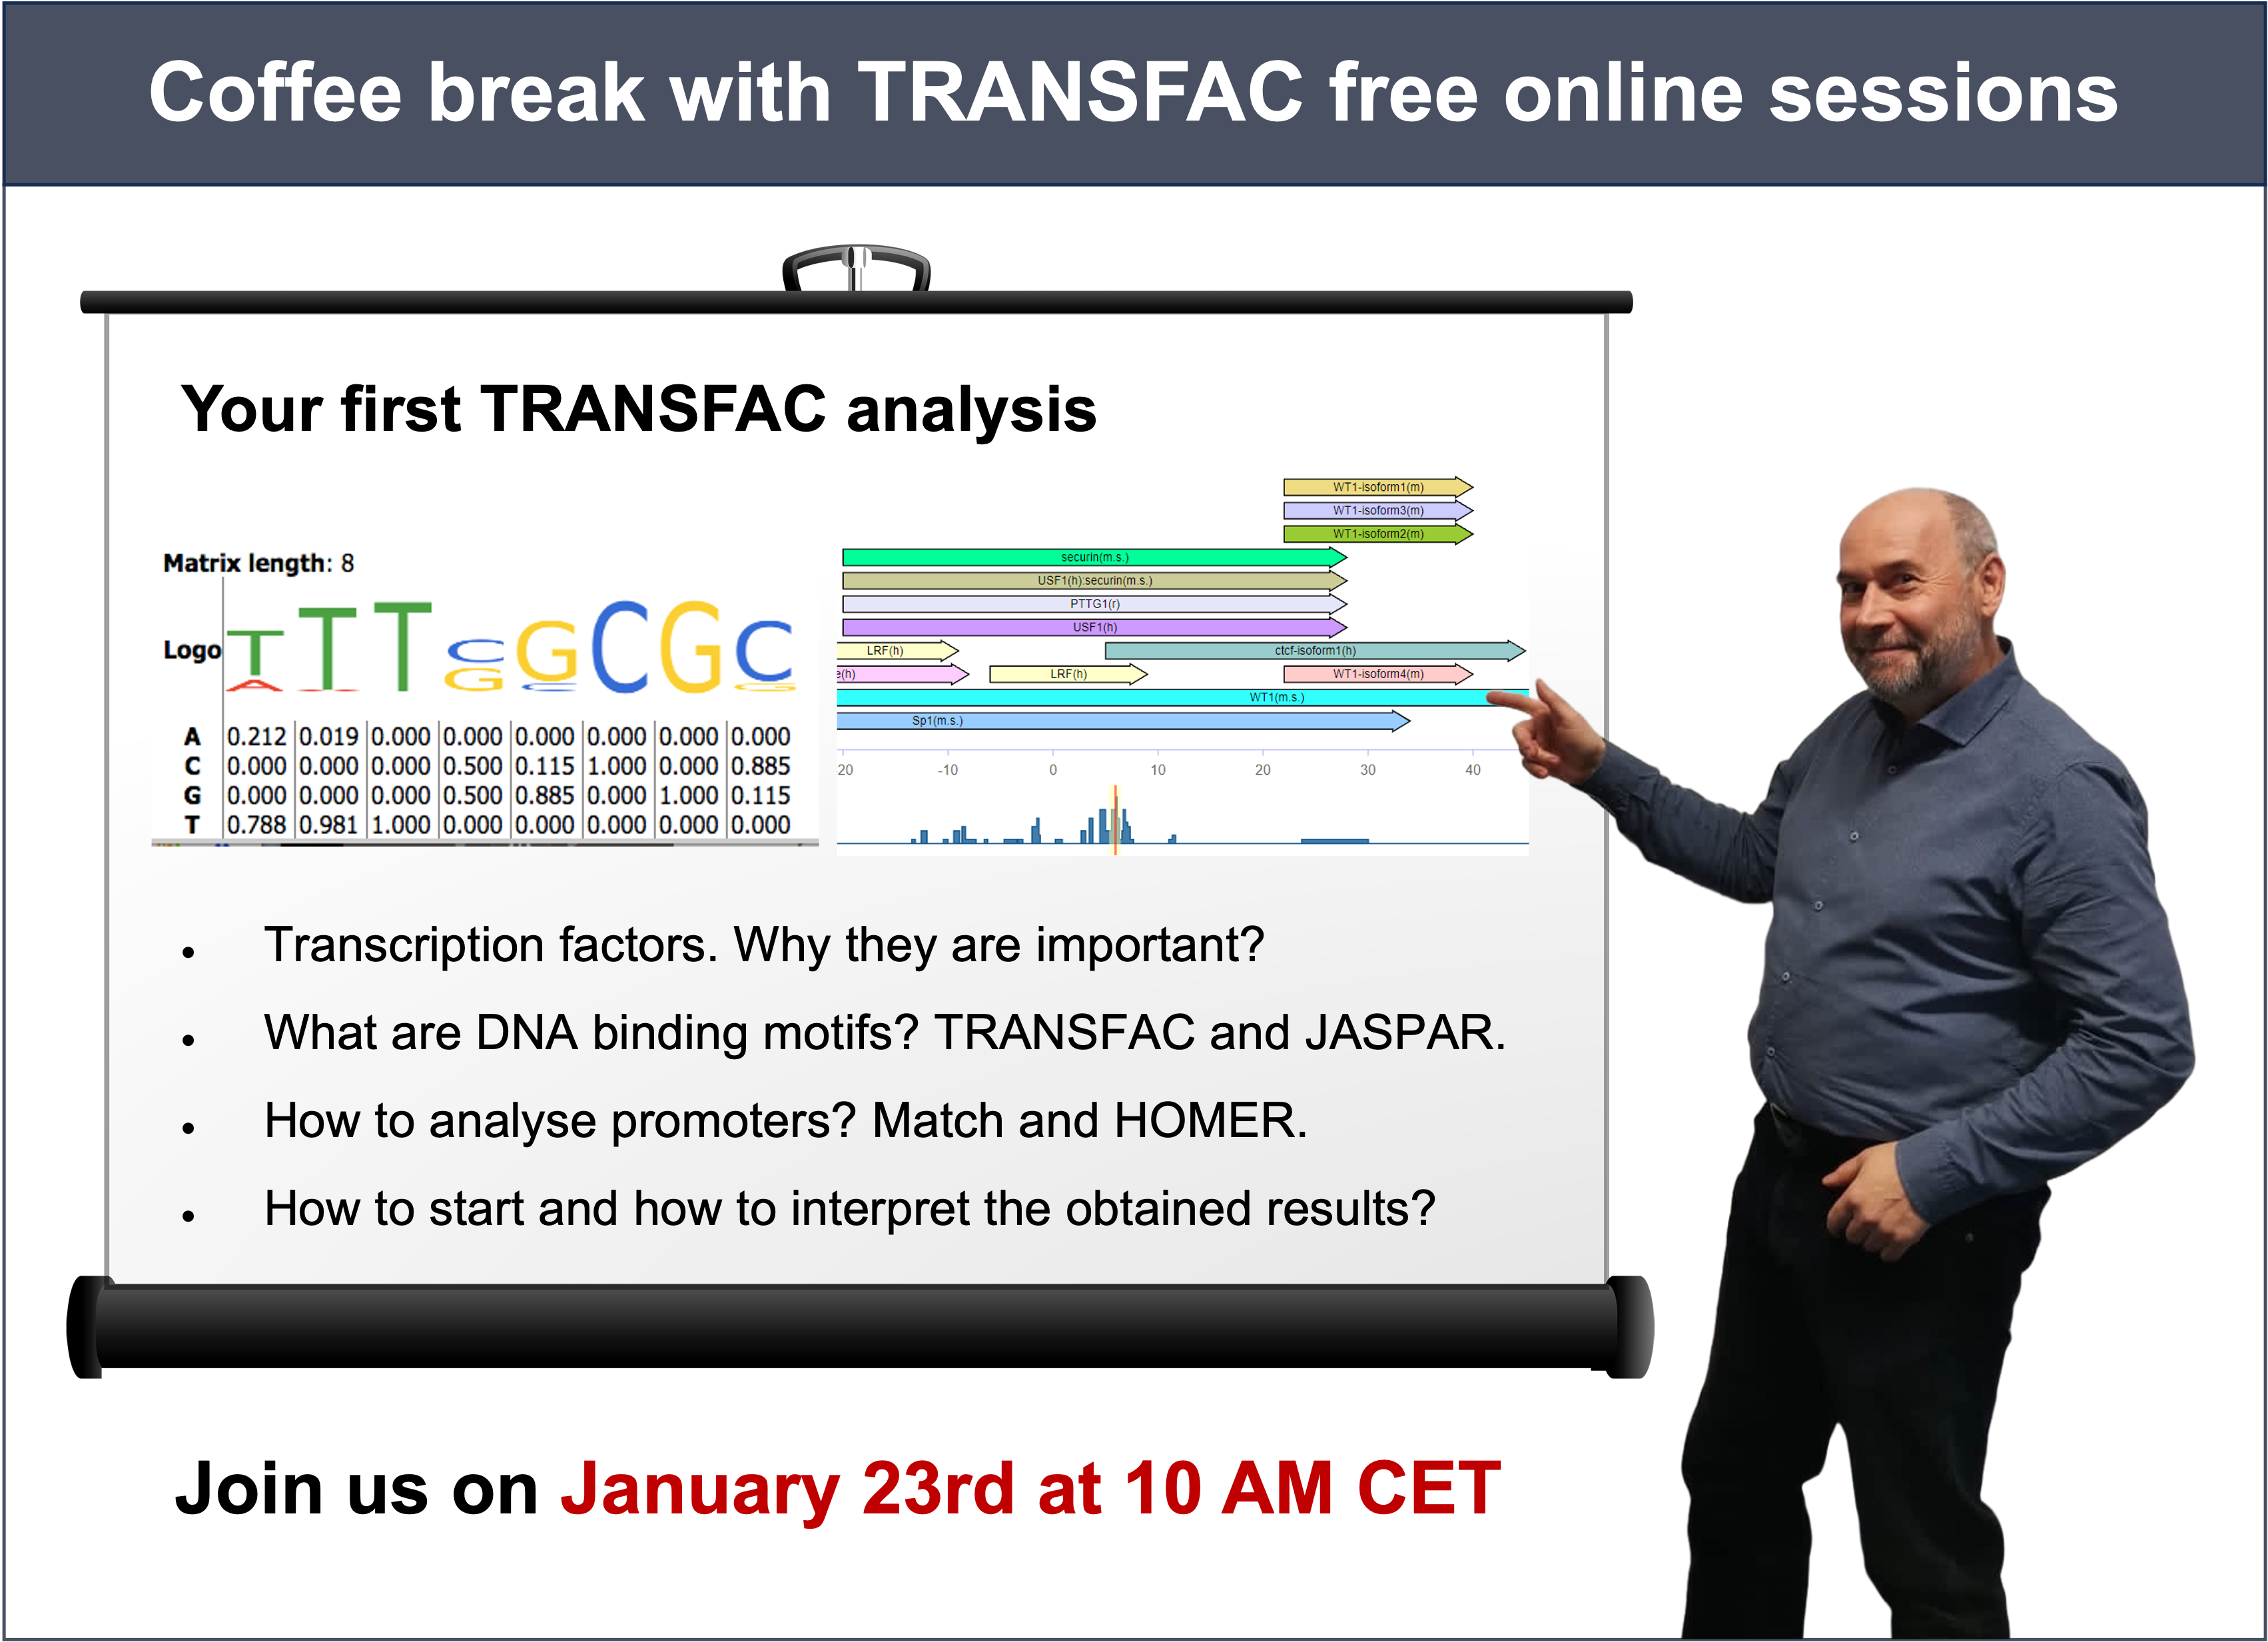 Coffee break with TRANSFAC: Your first TRANSFAC analysis, January 23rd at 10 AM CET